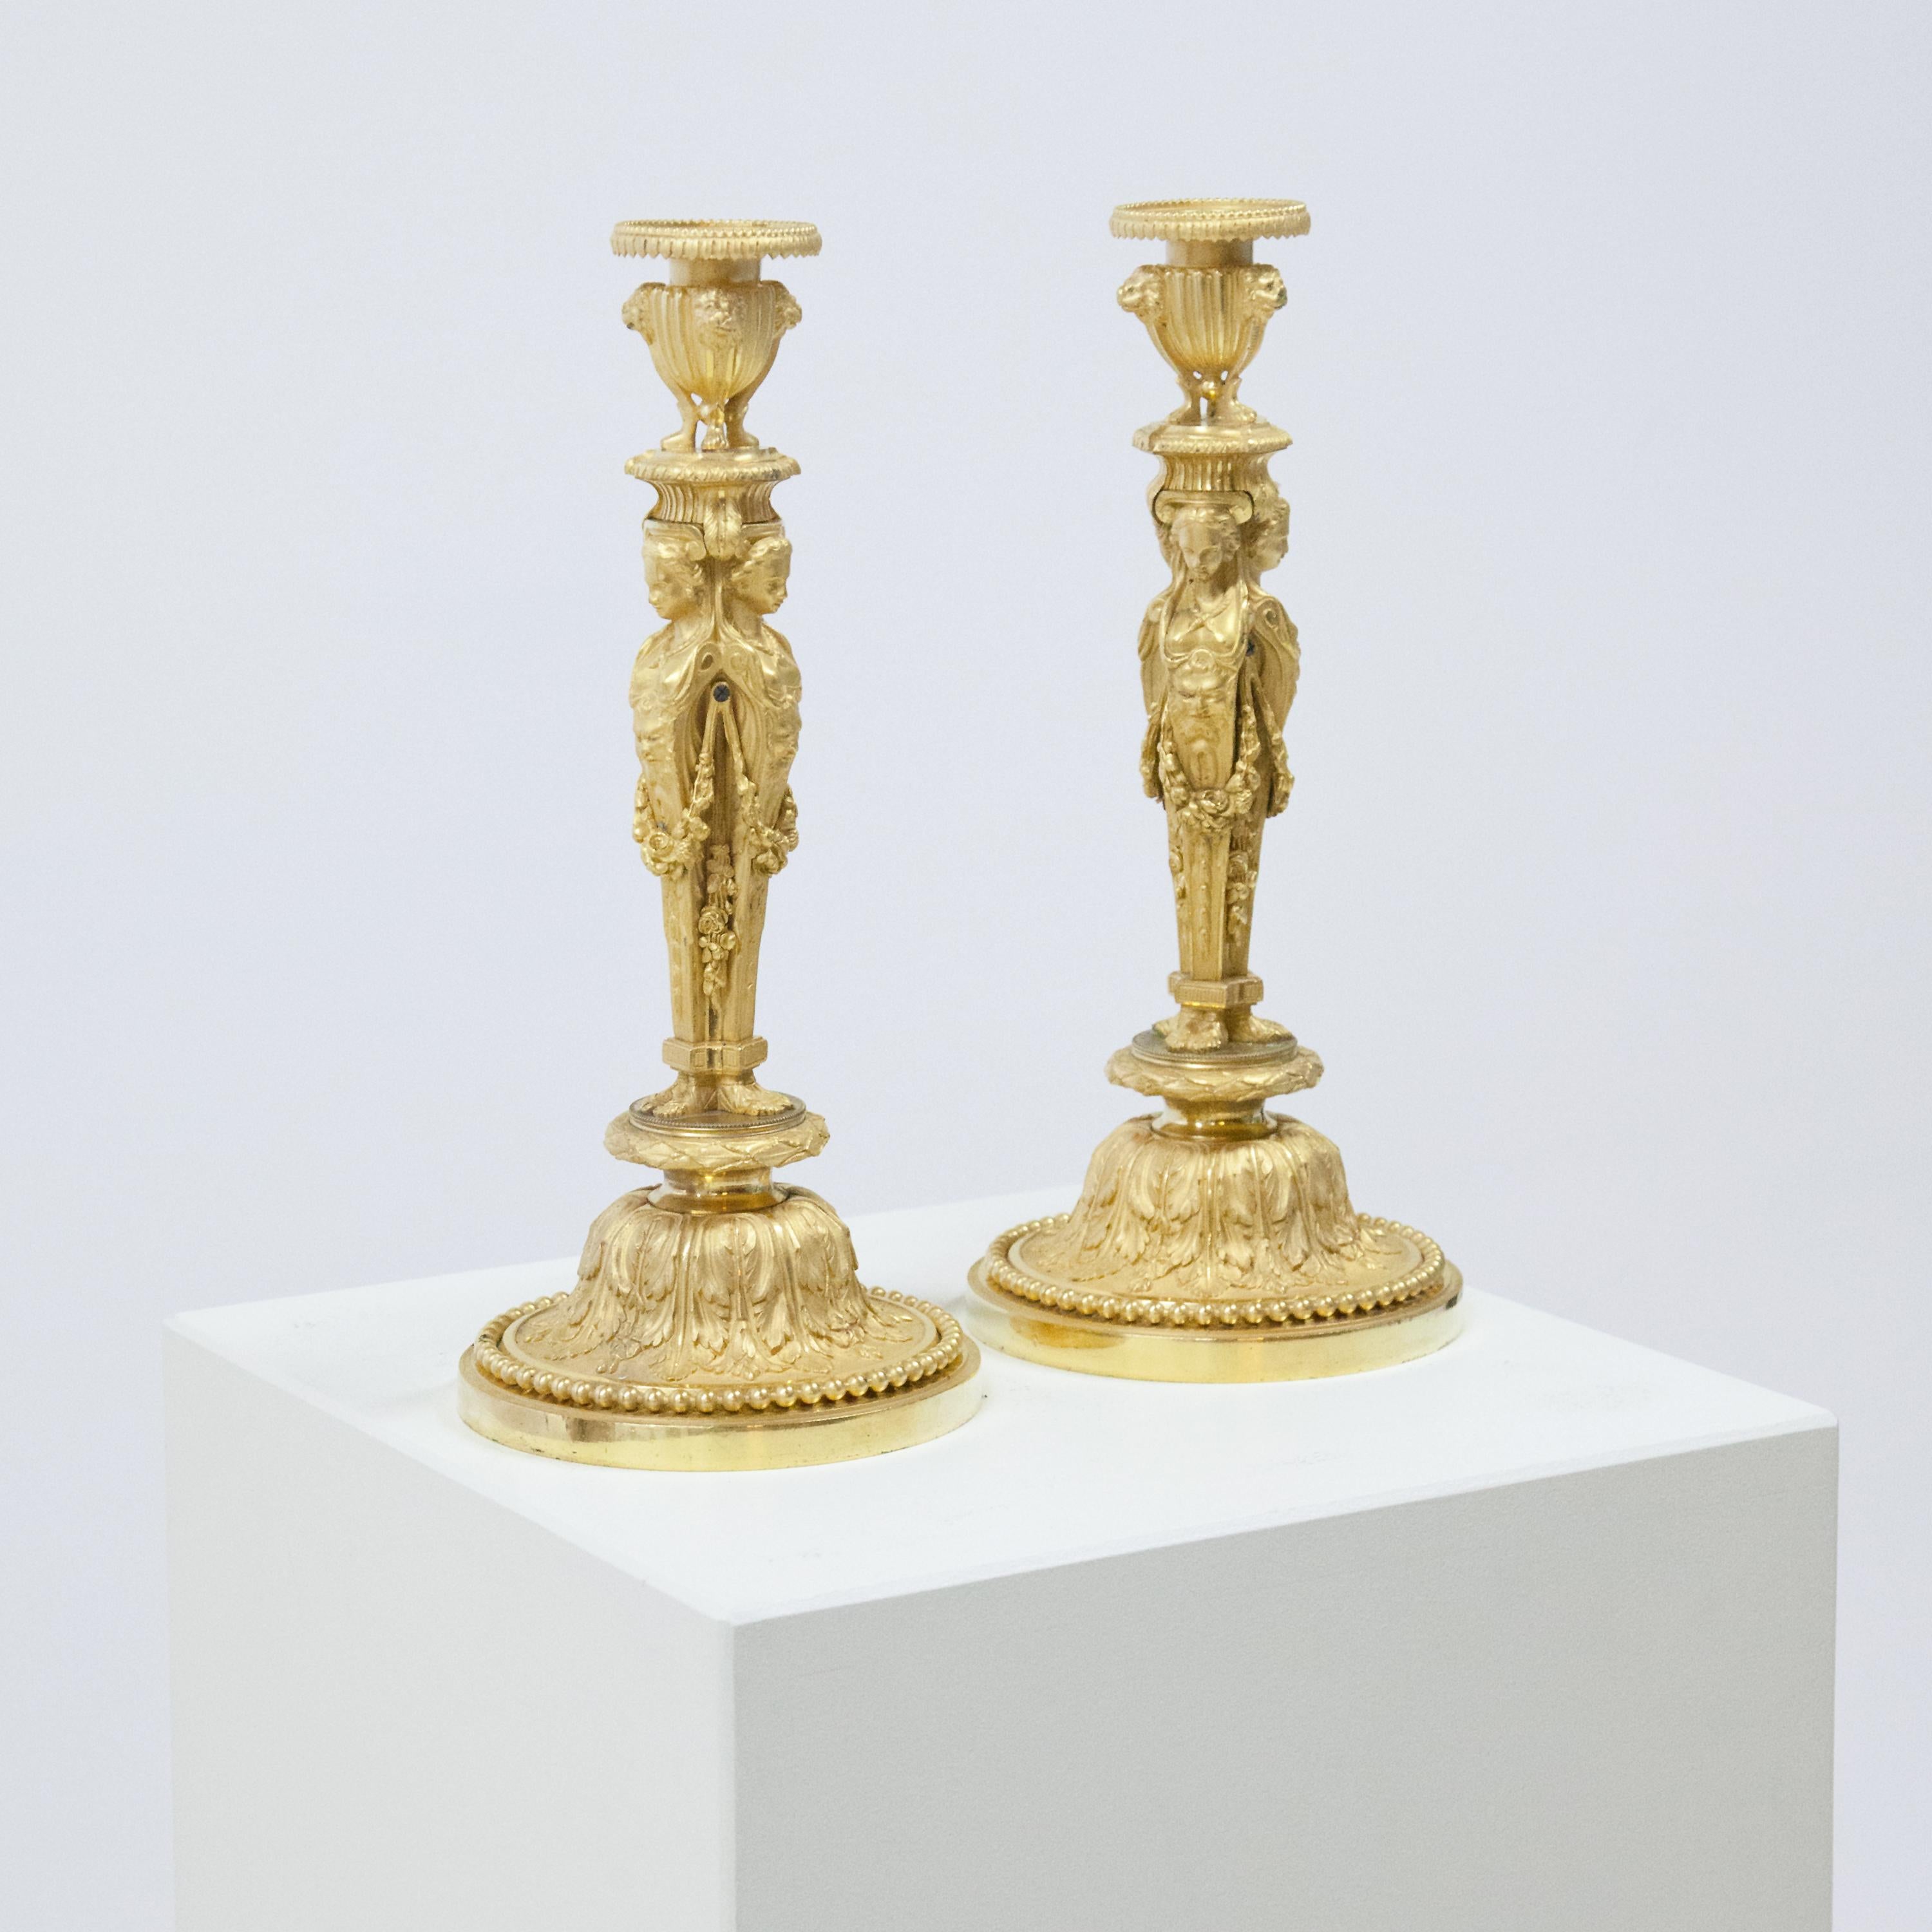 French Empire Candlesticks, J.-D. Dugourc, France, Early 19th Century